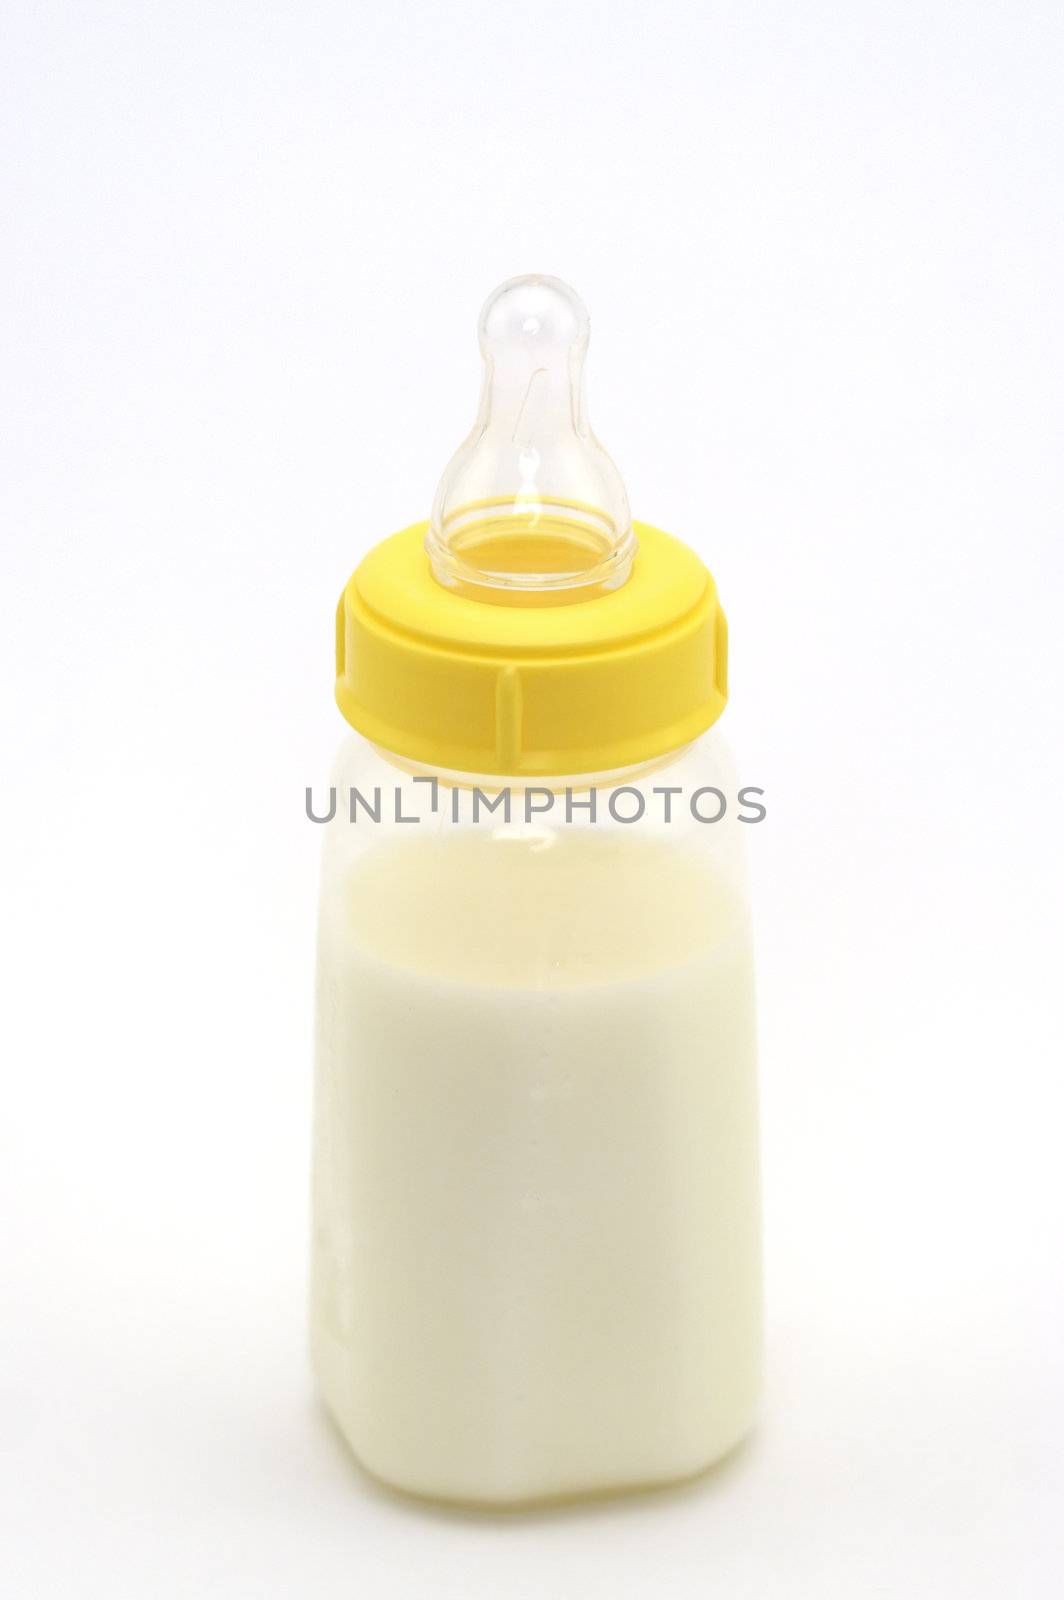 Baby bottle shot against a white background.